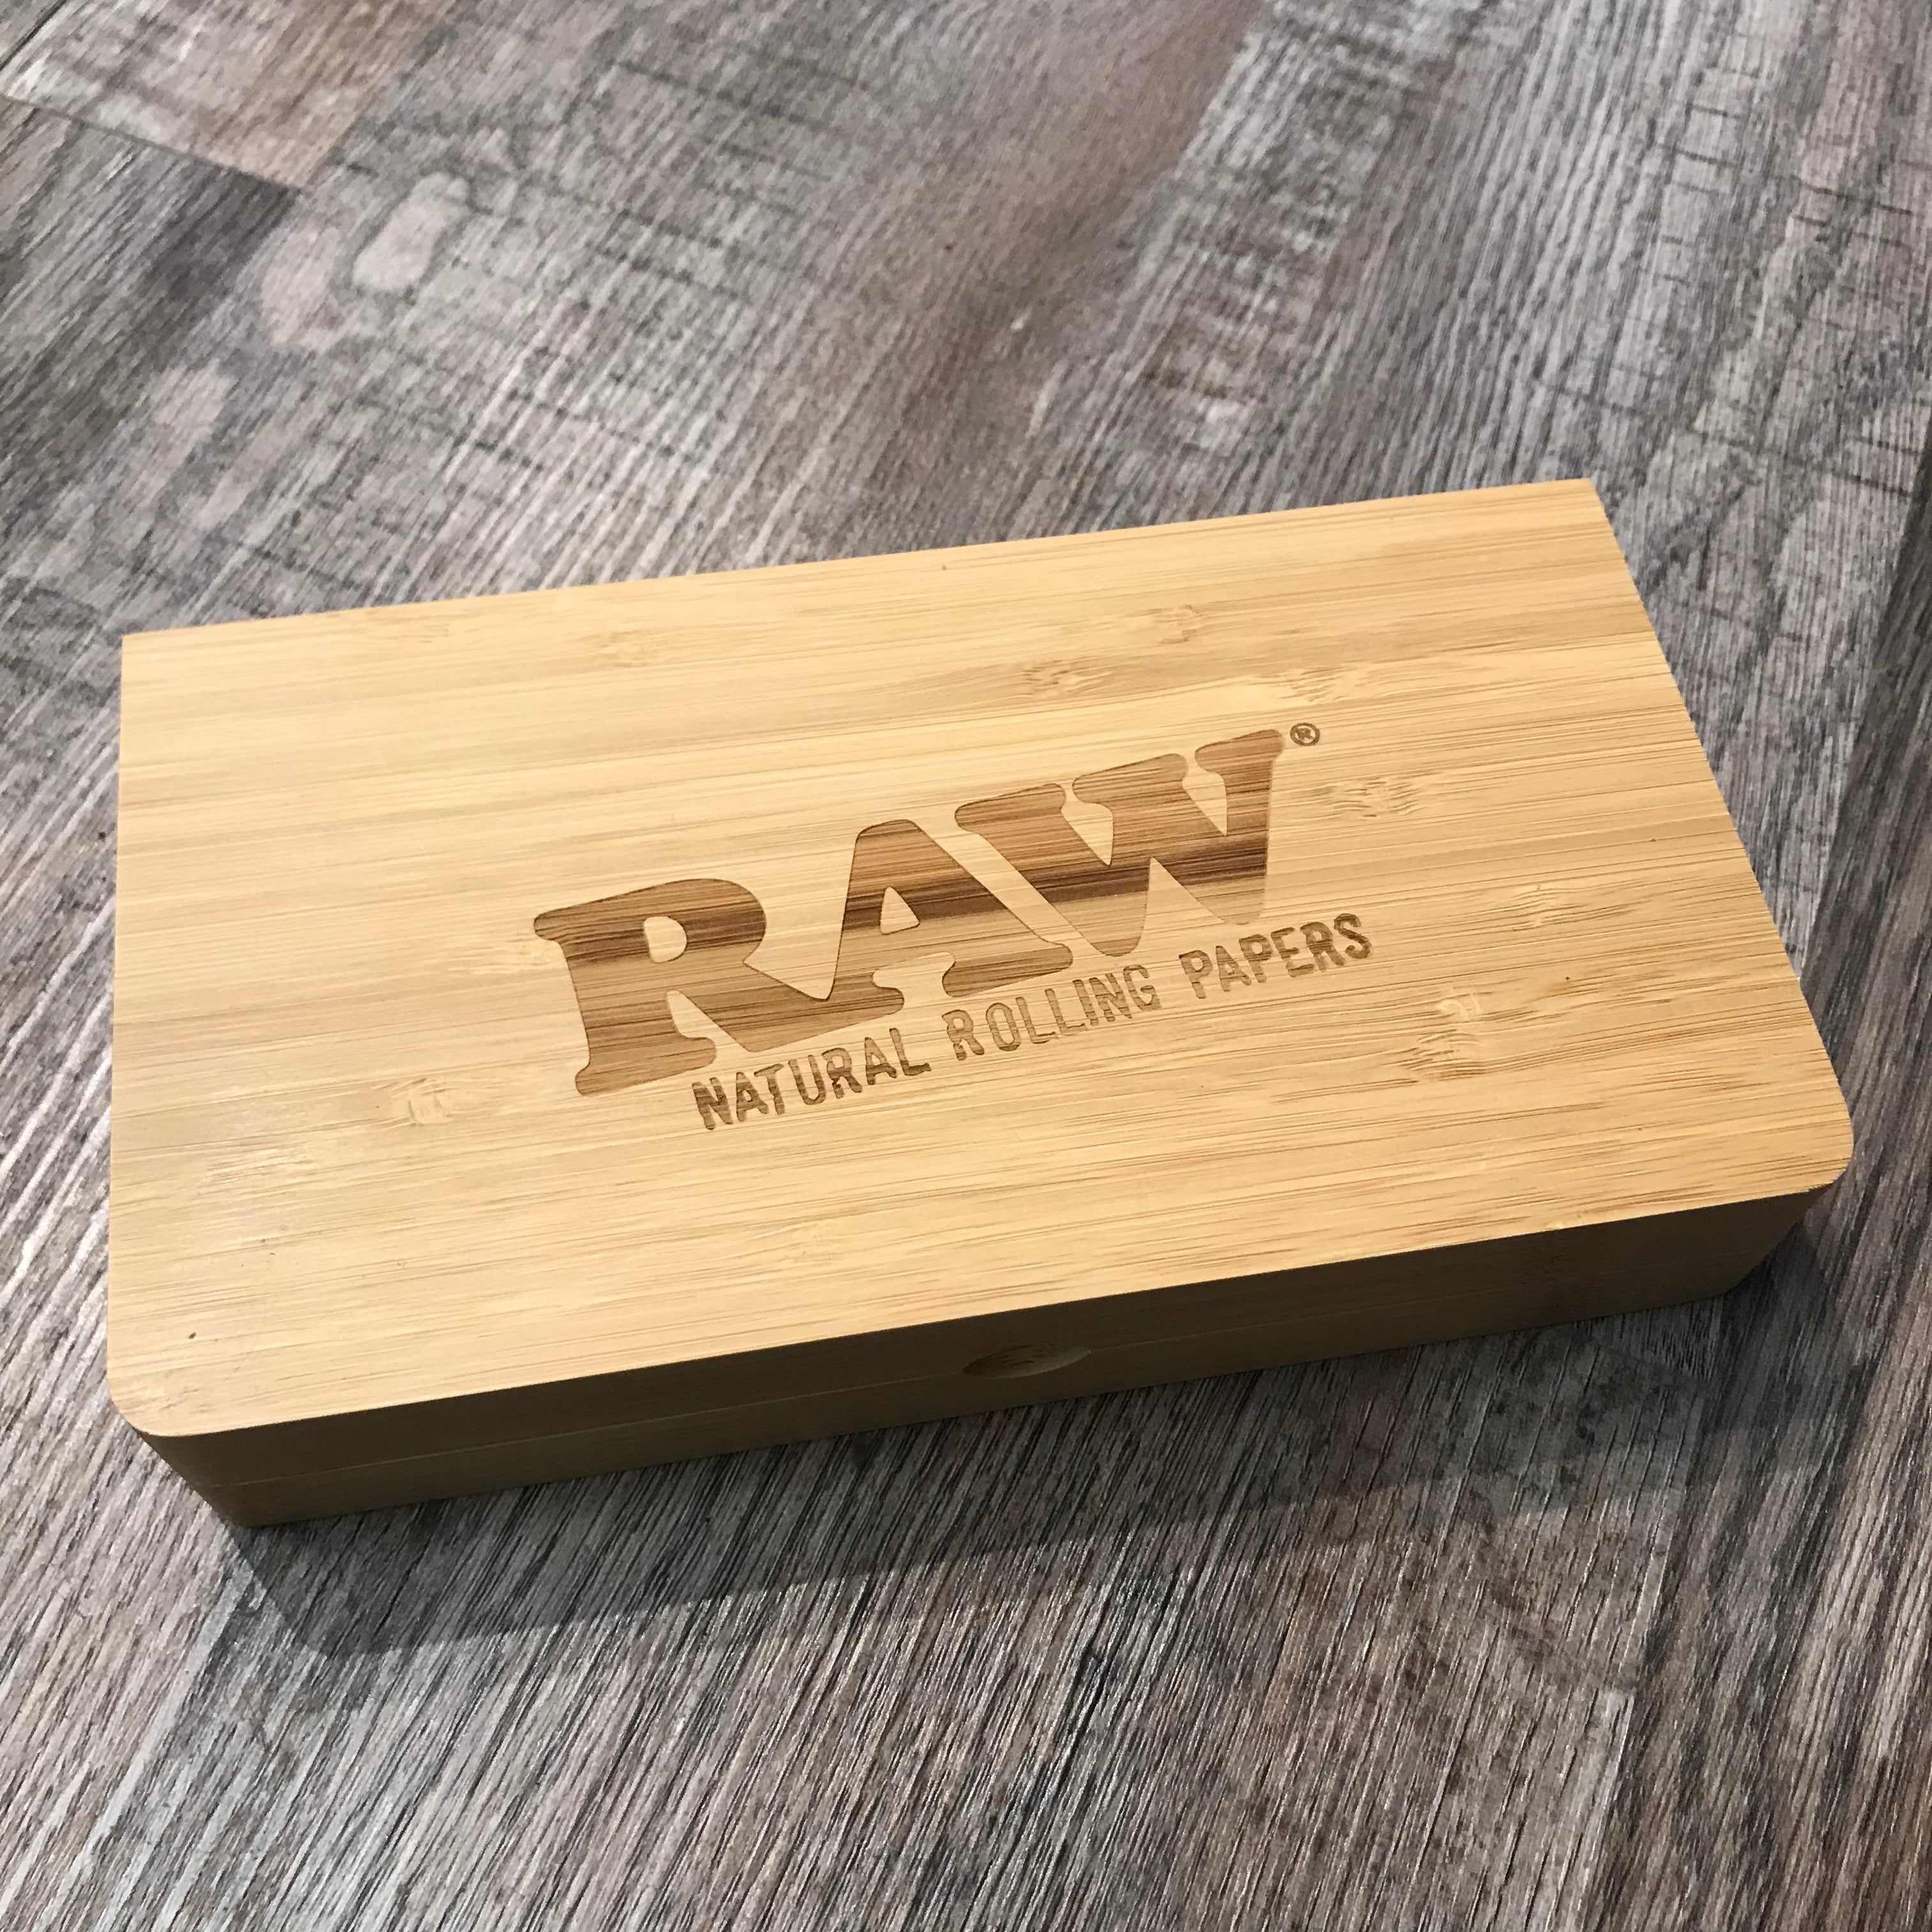 Raw "Backflip" Magnetic Wooden Rolling Tray